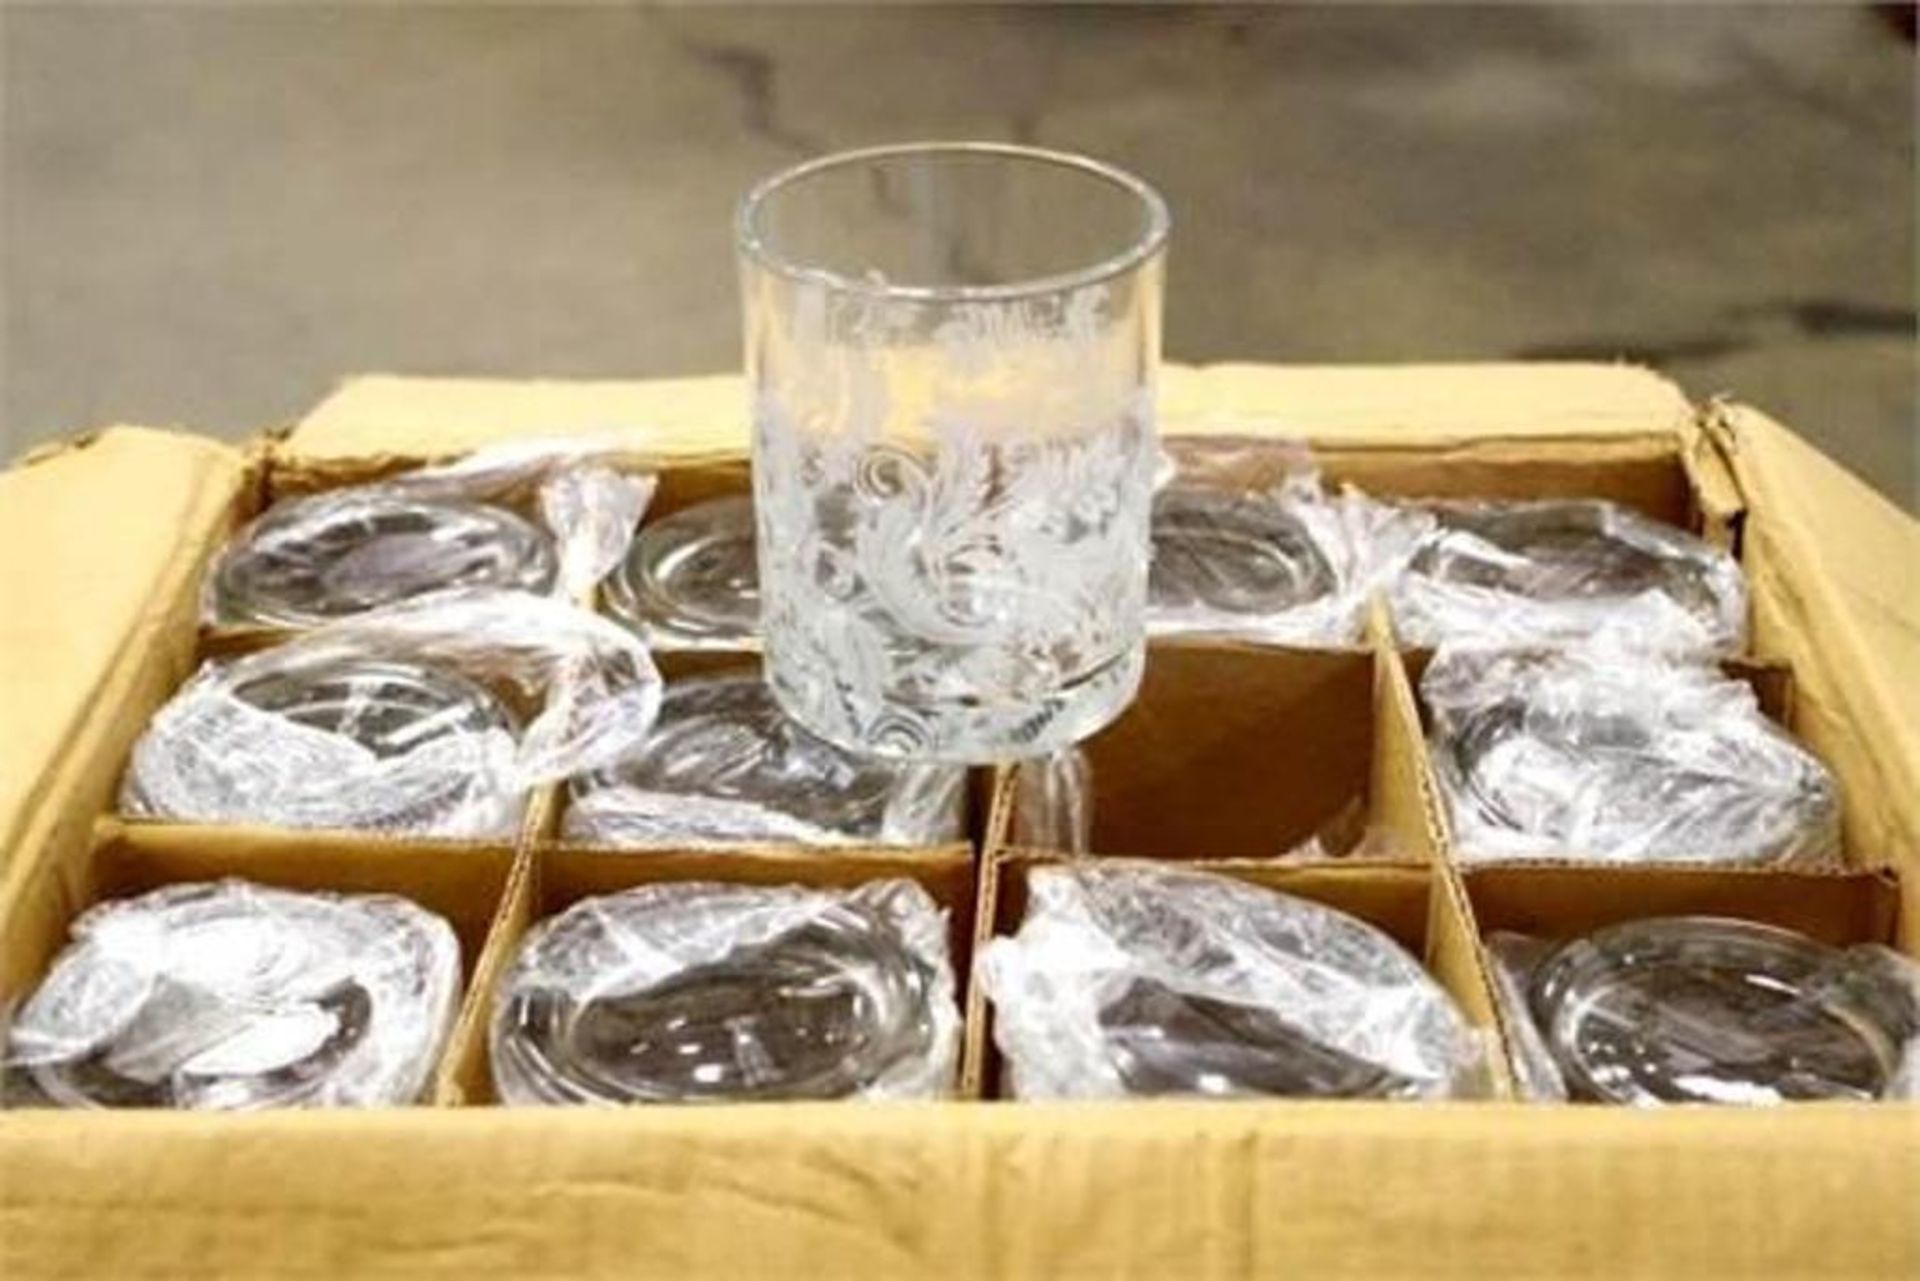 [Pallet] ESSENZA Candle Votives, 3MM Thick Glass W/ Frosted Decorative Pattern - Image 2 of 5